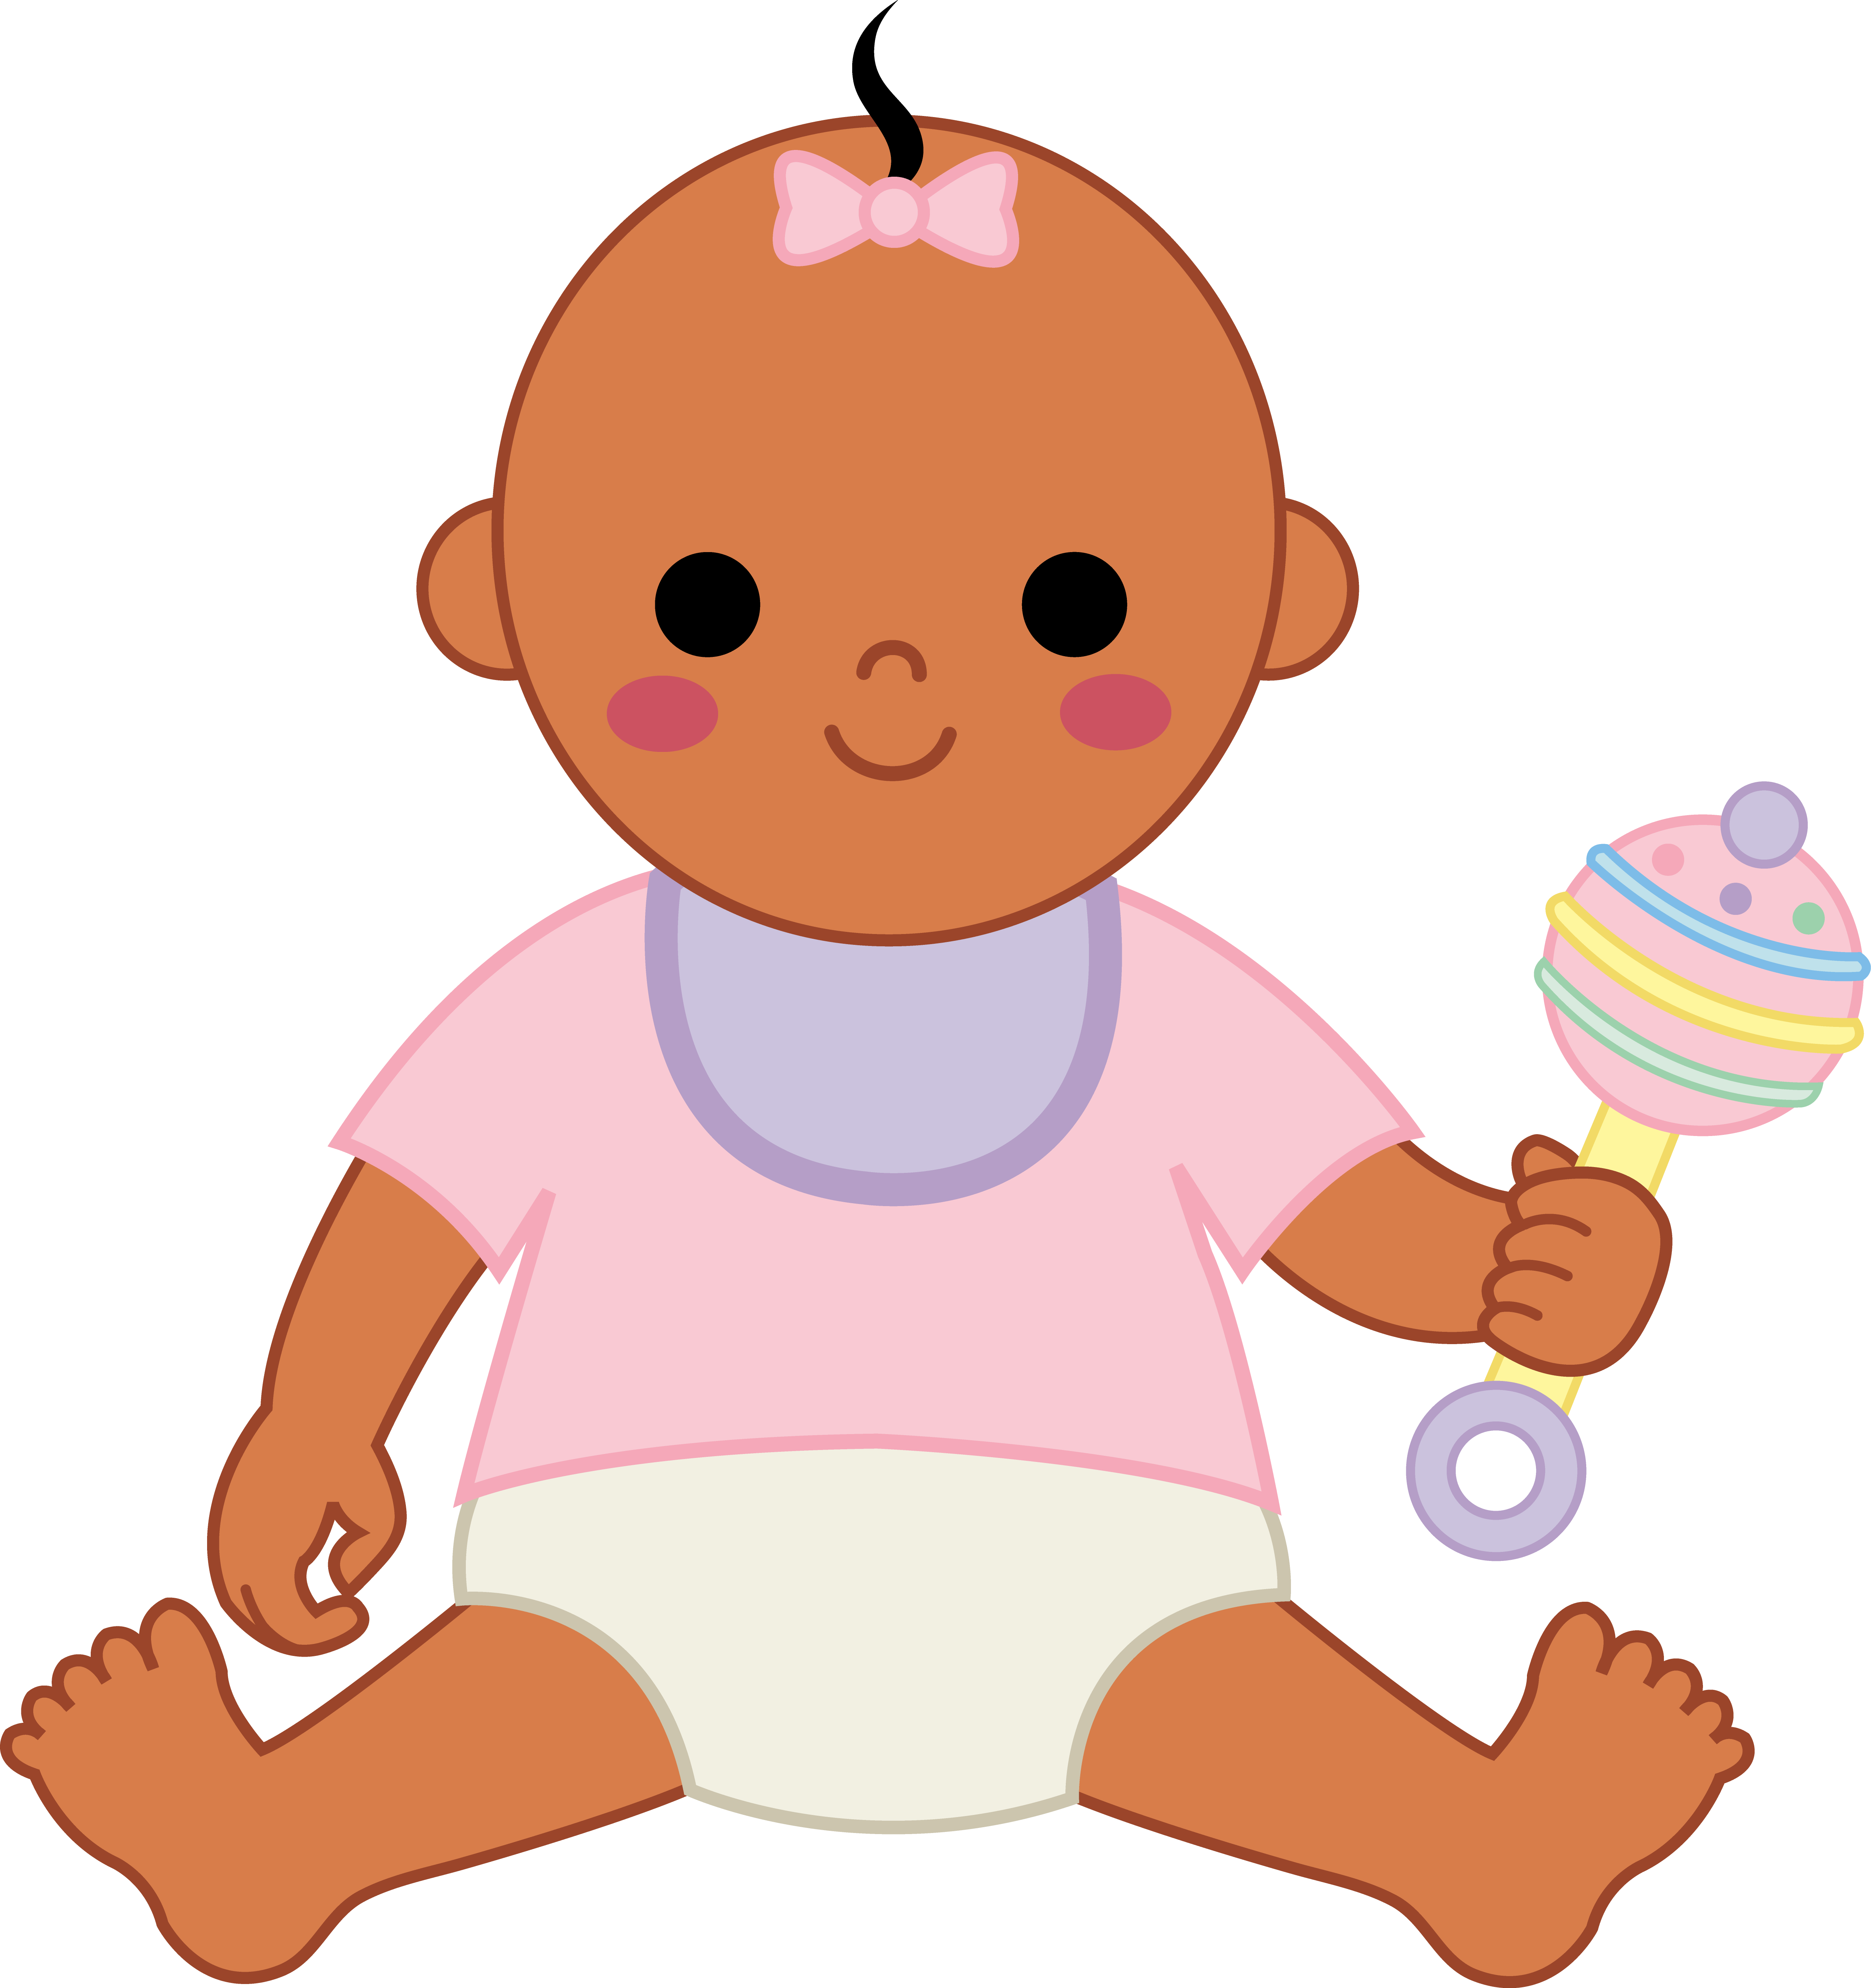 Baby Doll Clip Art Group ... 